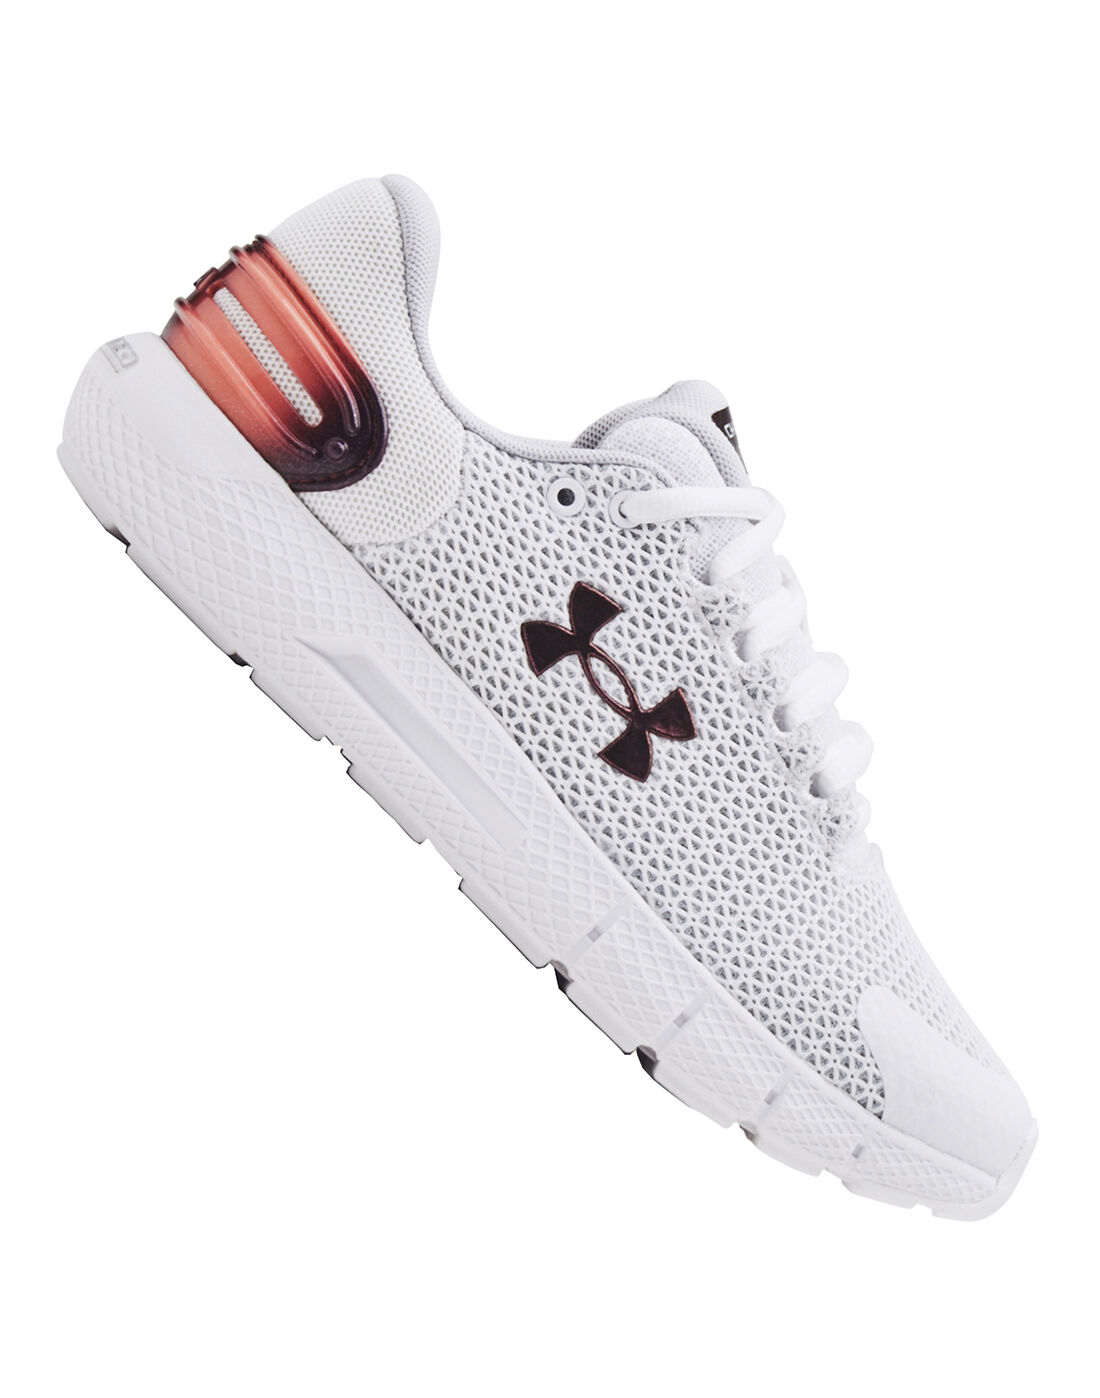 under armour charged soccer cleats